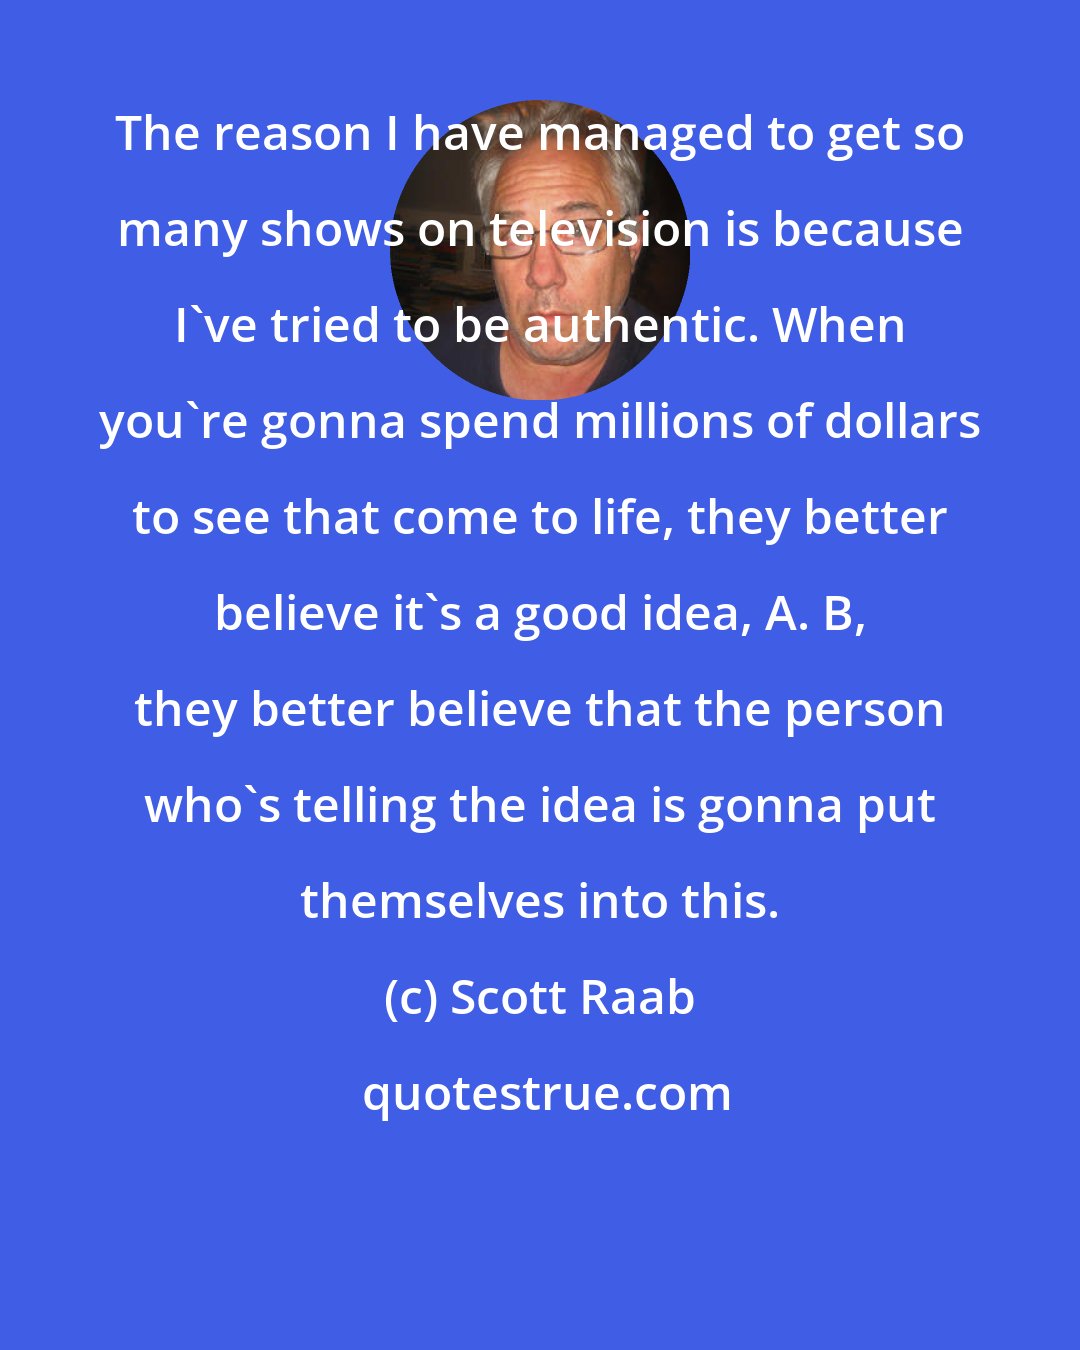 Scott Raab: The reason I have managed to get so many shows on television is because I've tried to be authentic. When you're gonna spend millions of dollars to see that come to life, they better believe it's a good idea, A. B, they better believe that the person who's telling the idea is gonna put themselves into this.